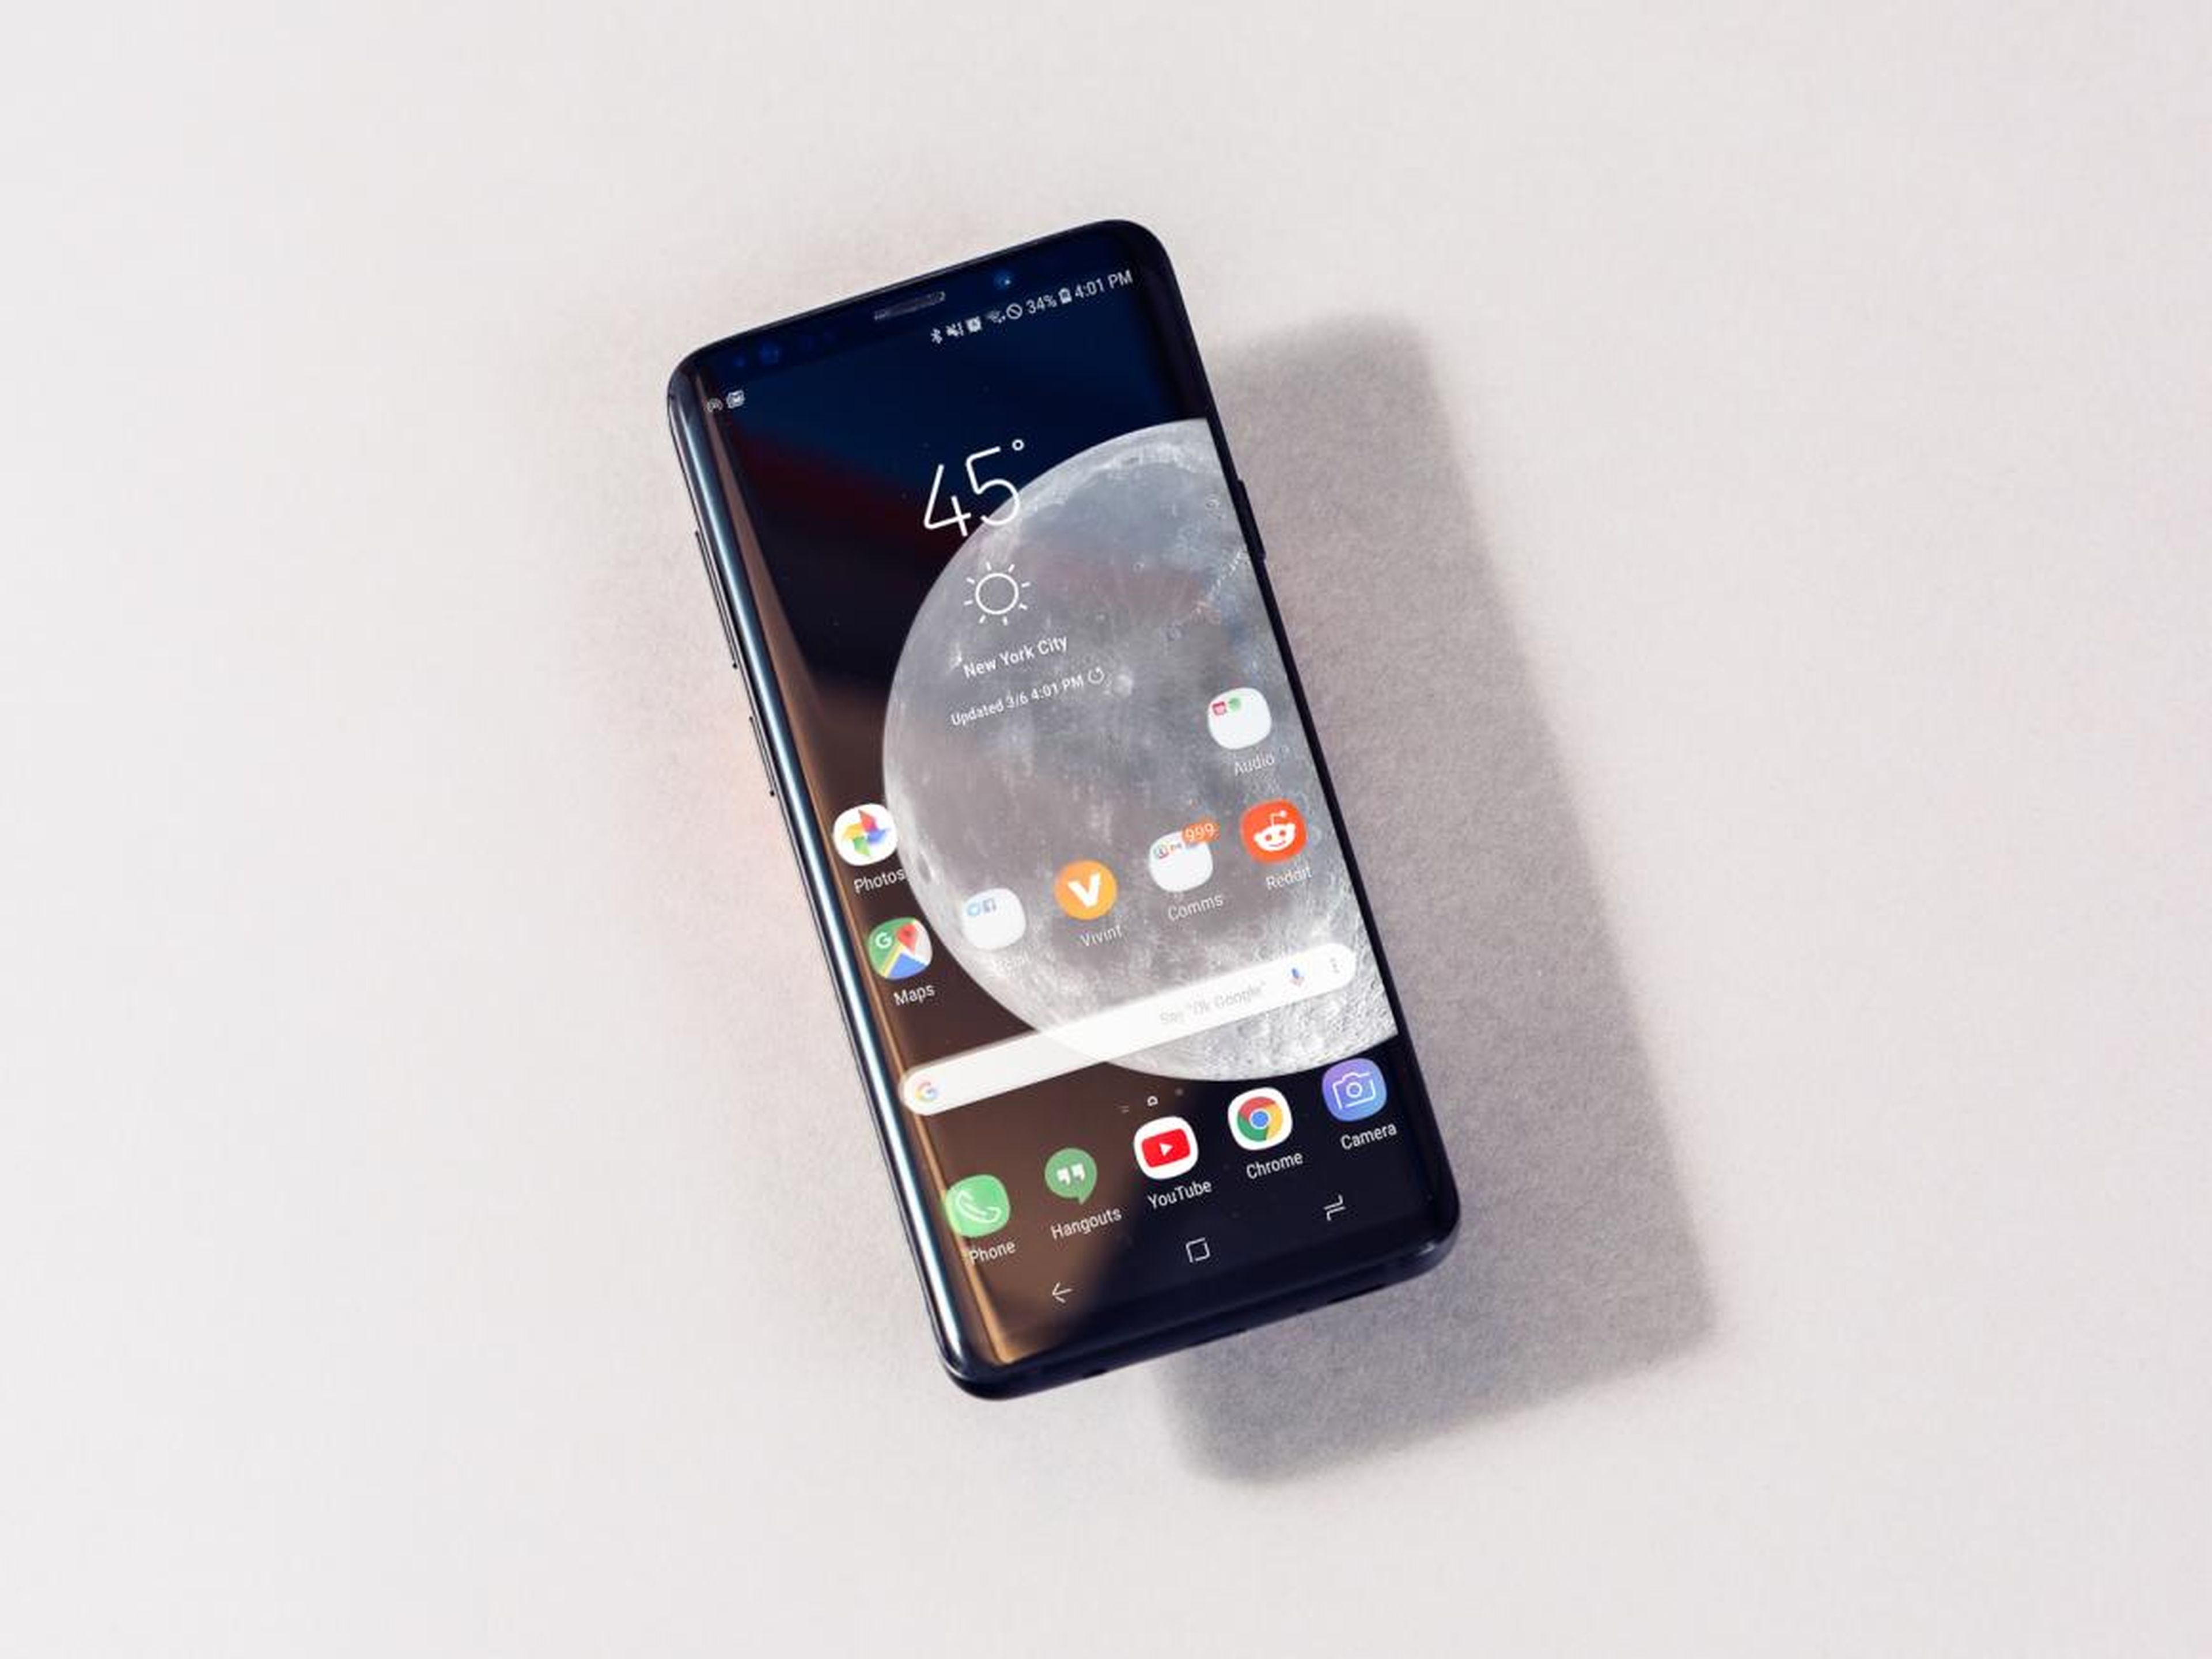 ... and the Galaxy S9 and Galaxy S9+ both weigh less than the Galaxy Note 9.